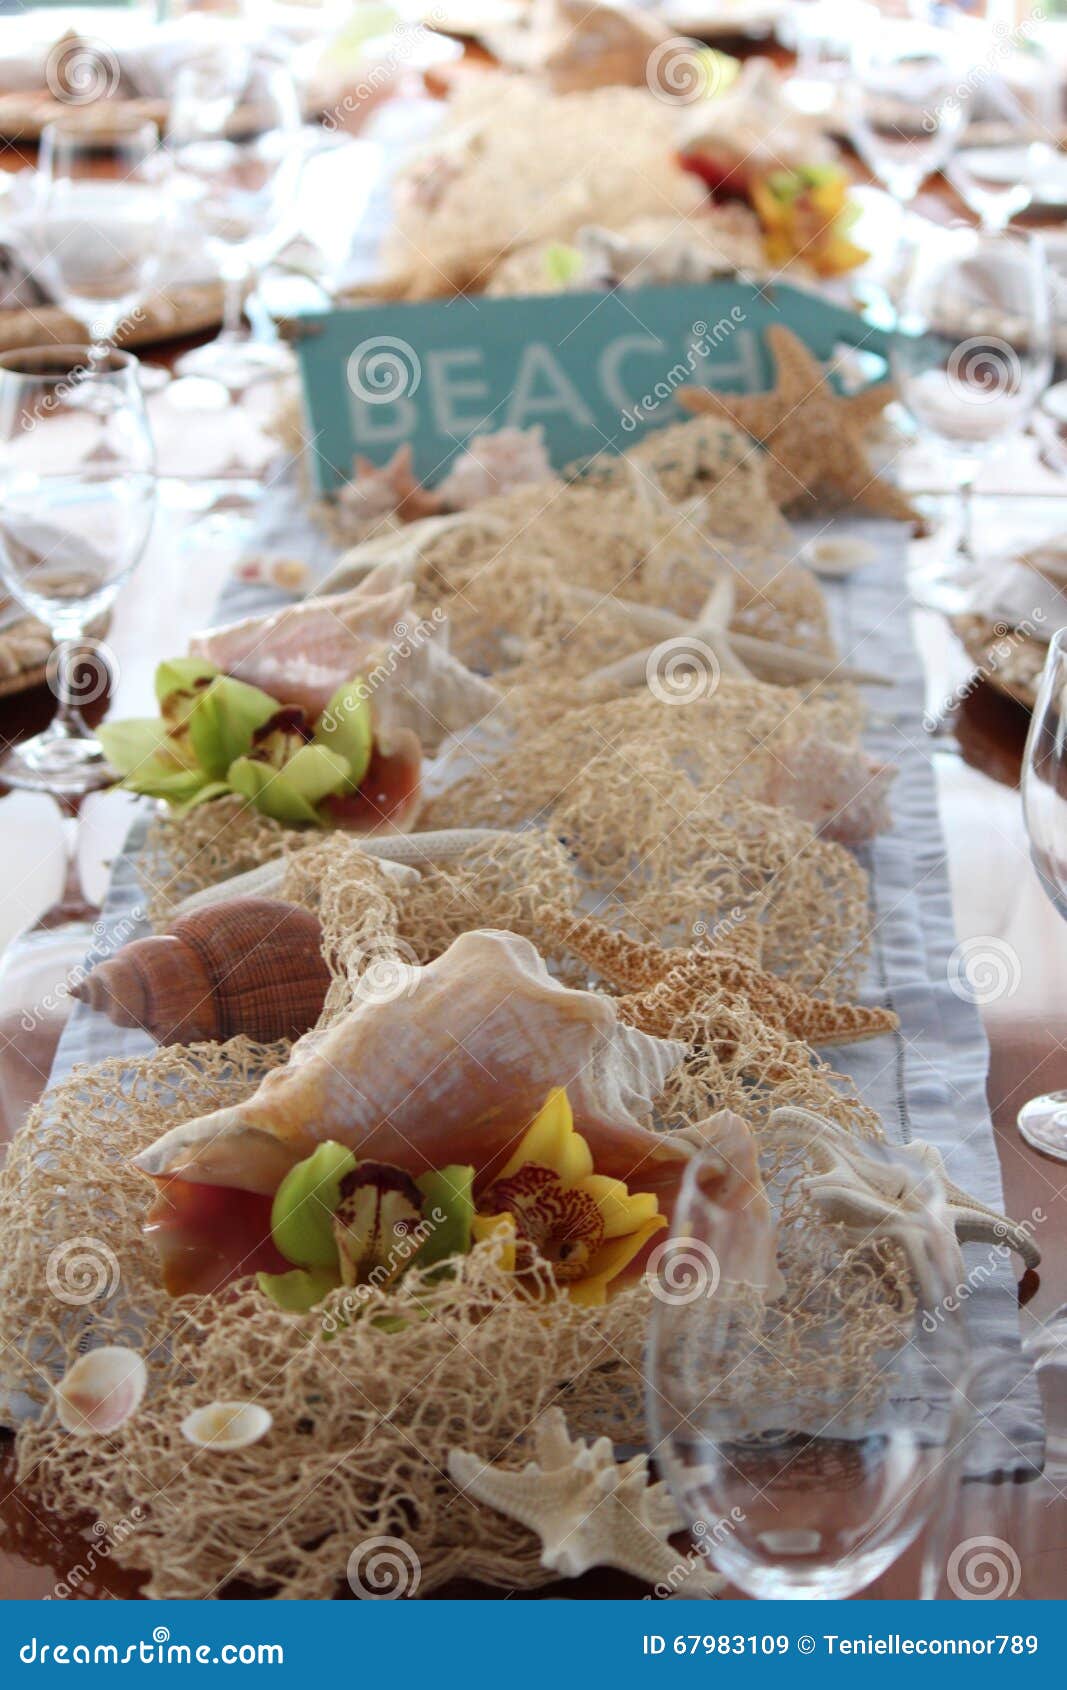 Beach Themed Decor for a Table Setting. Stock Image - Image of themed,  shells: 67983109